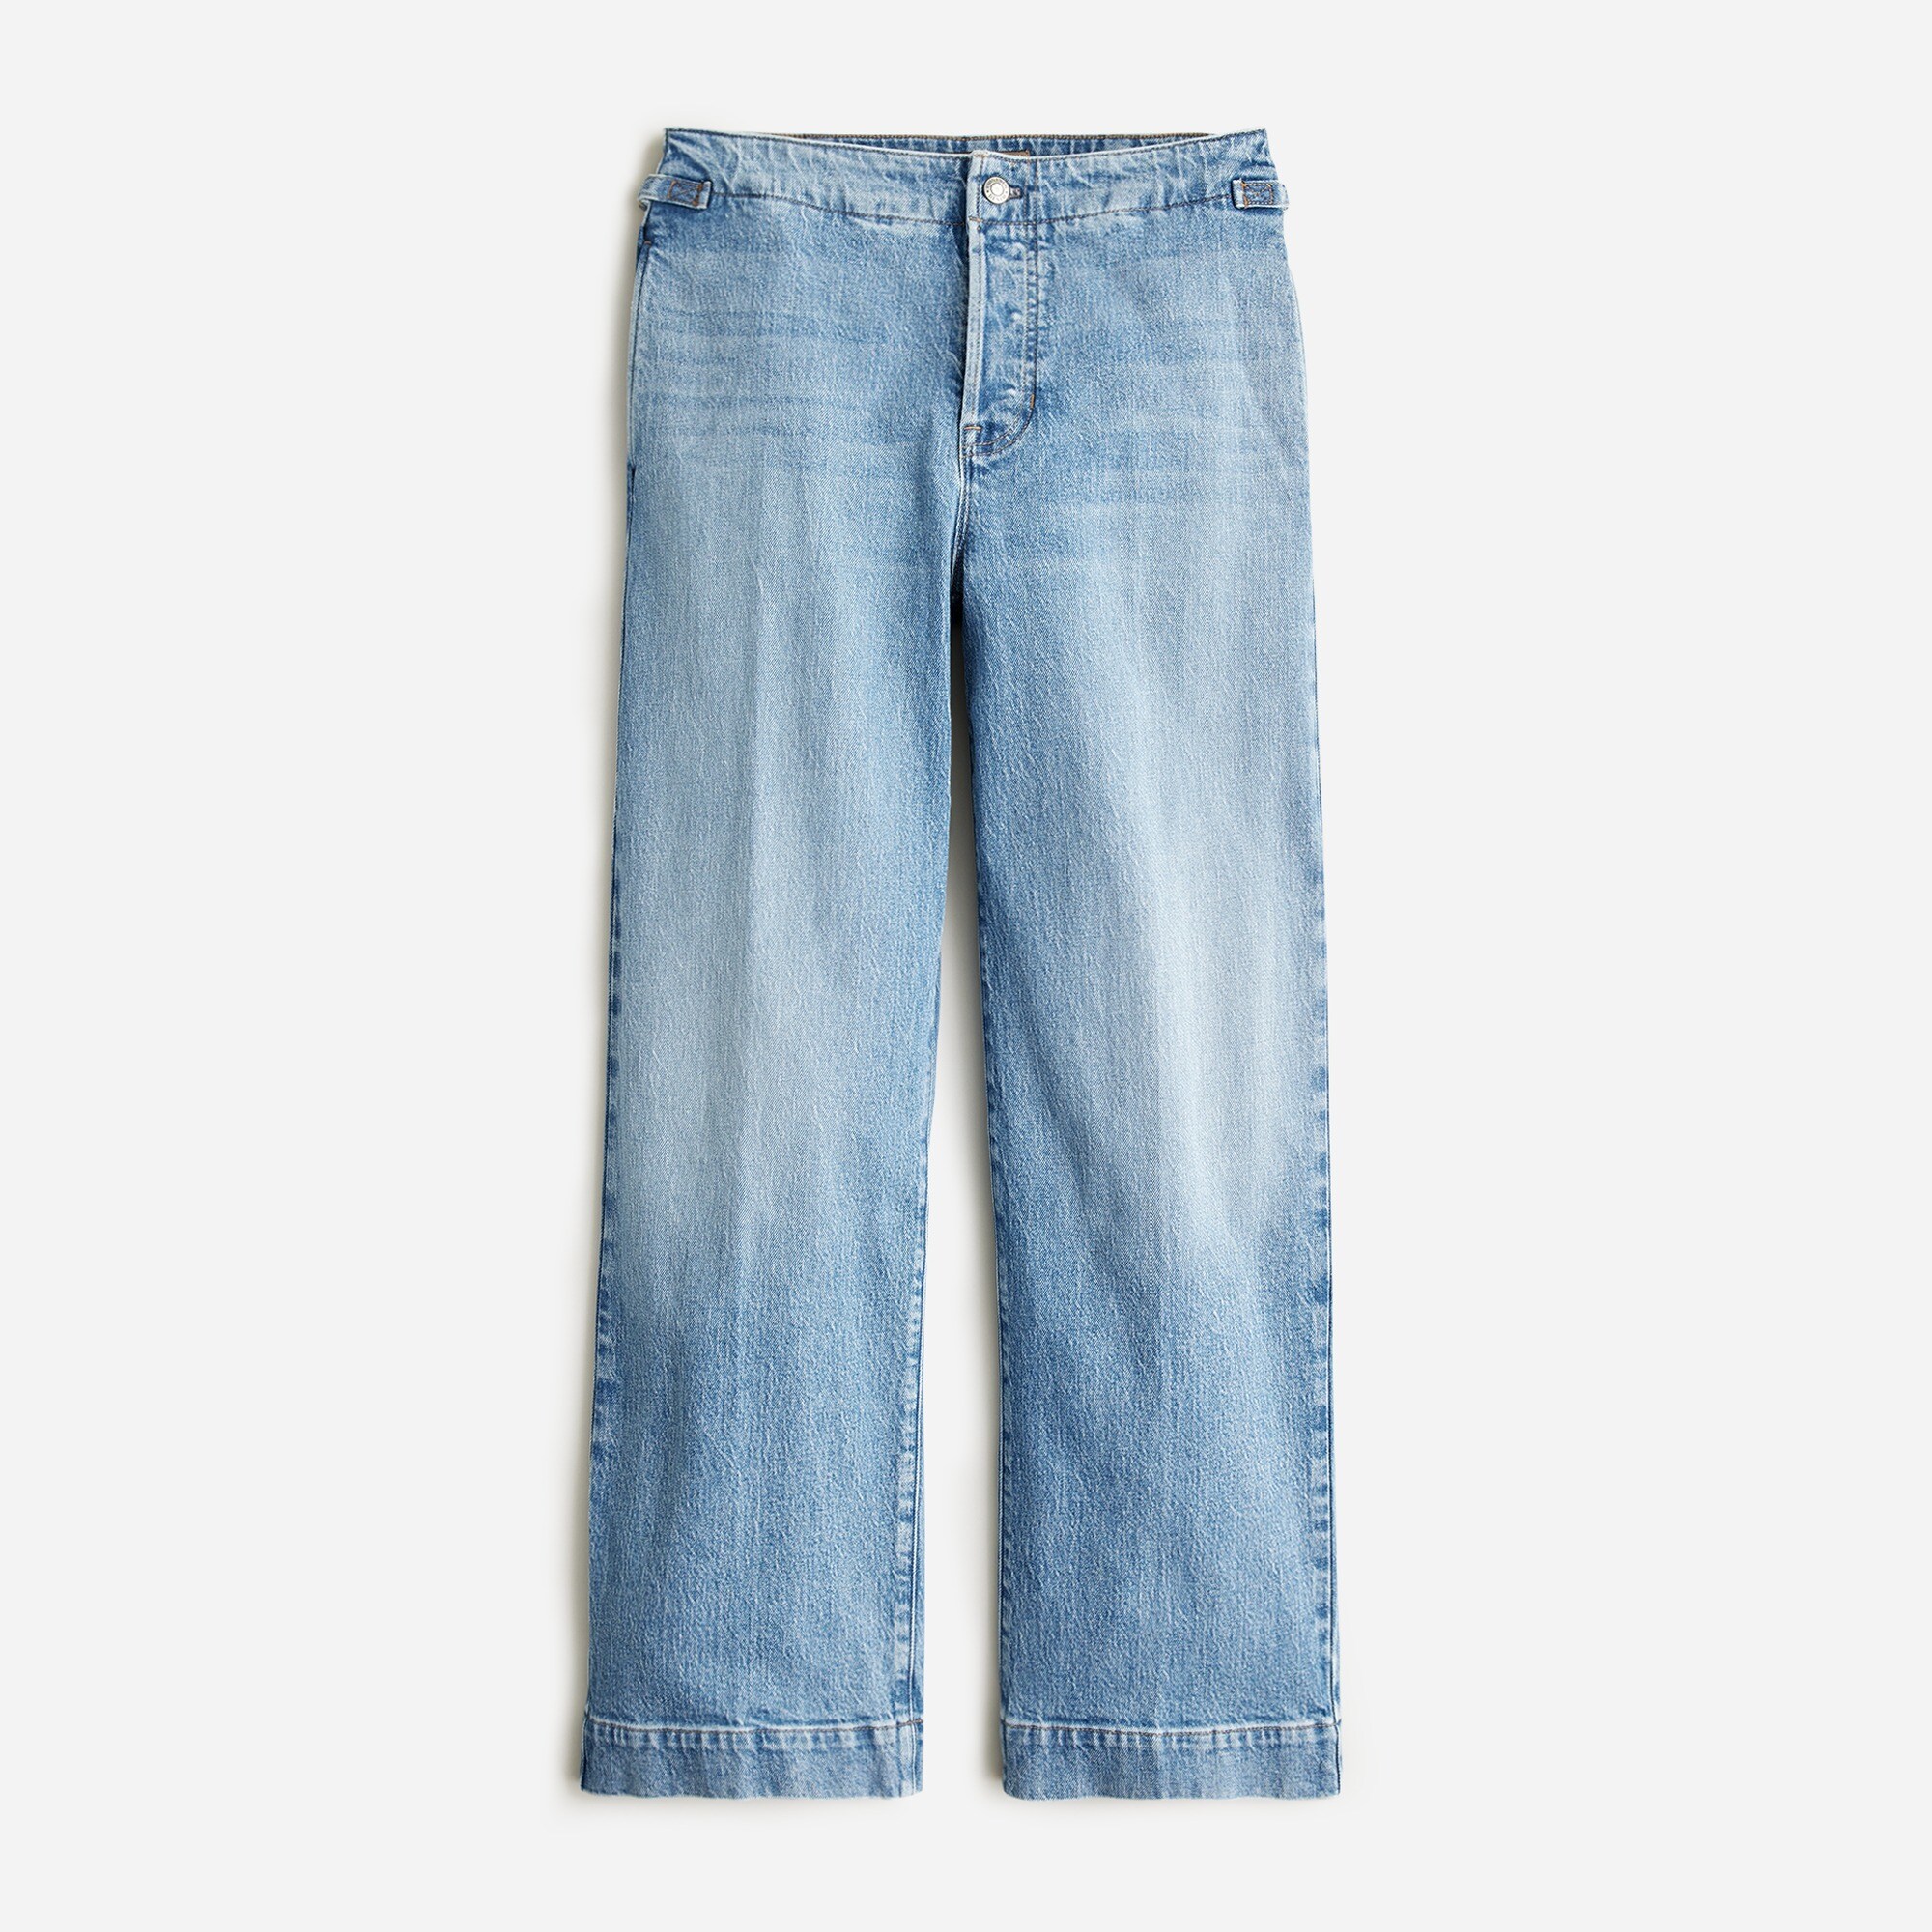  Point Sur side-tab trouser in Mia wash